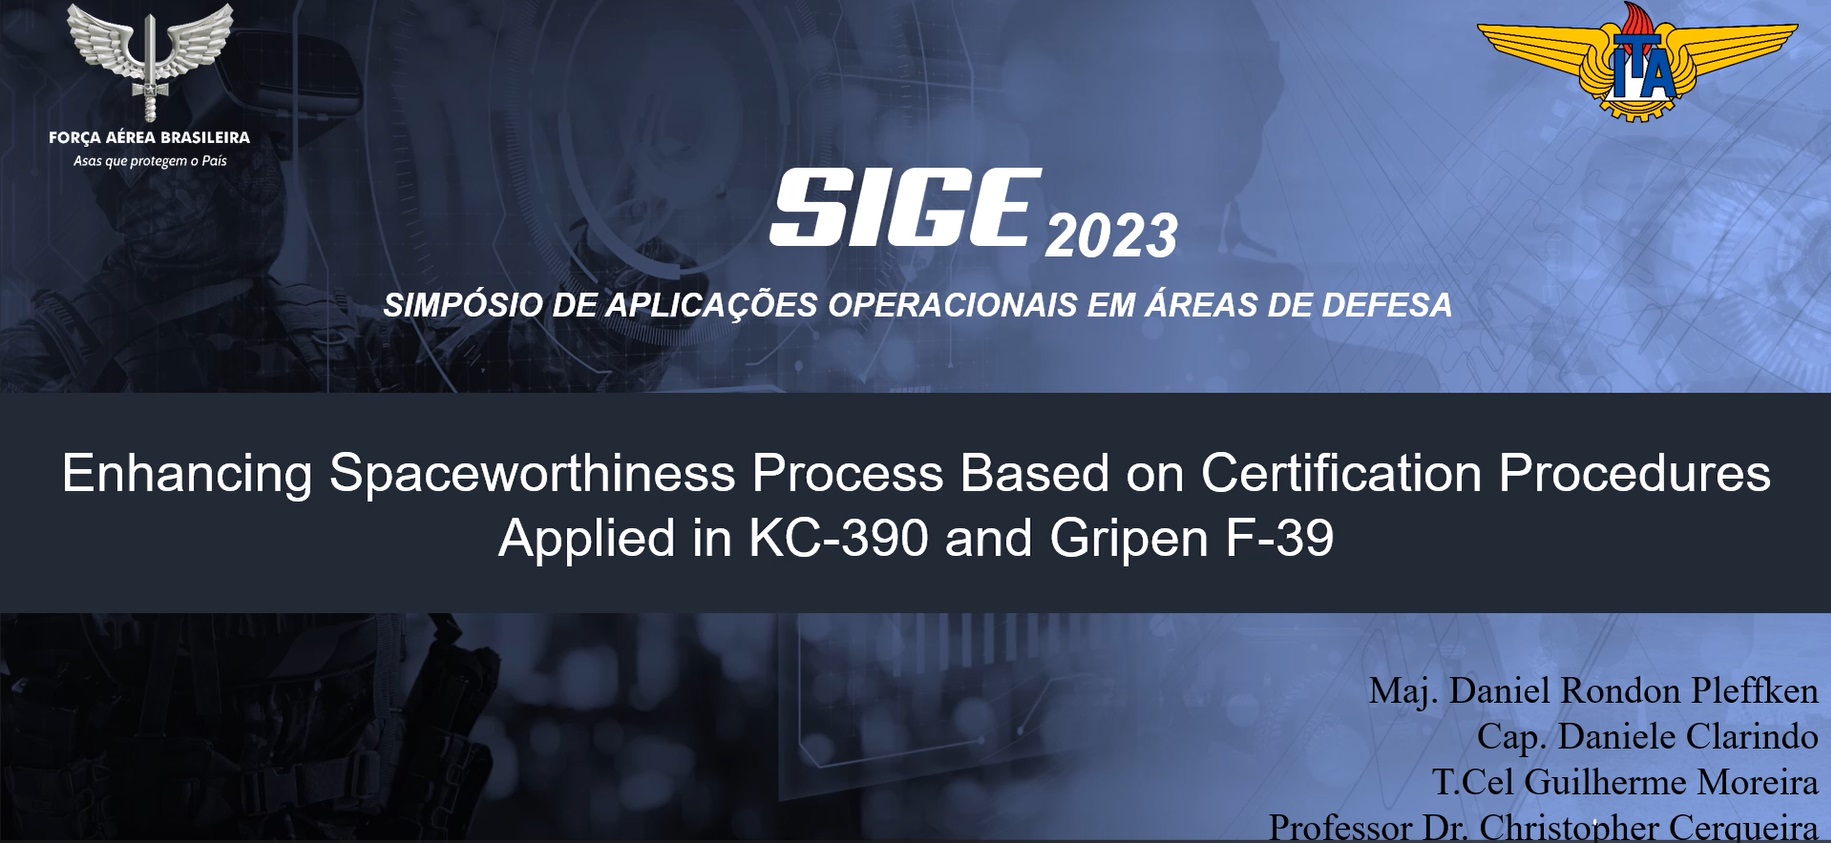 Enhancing Spaceworthiness Process Based on Certification Procedures Applied in KC-390 and Gripen F-39